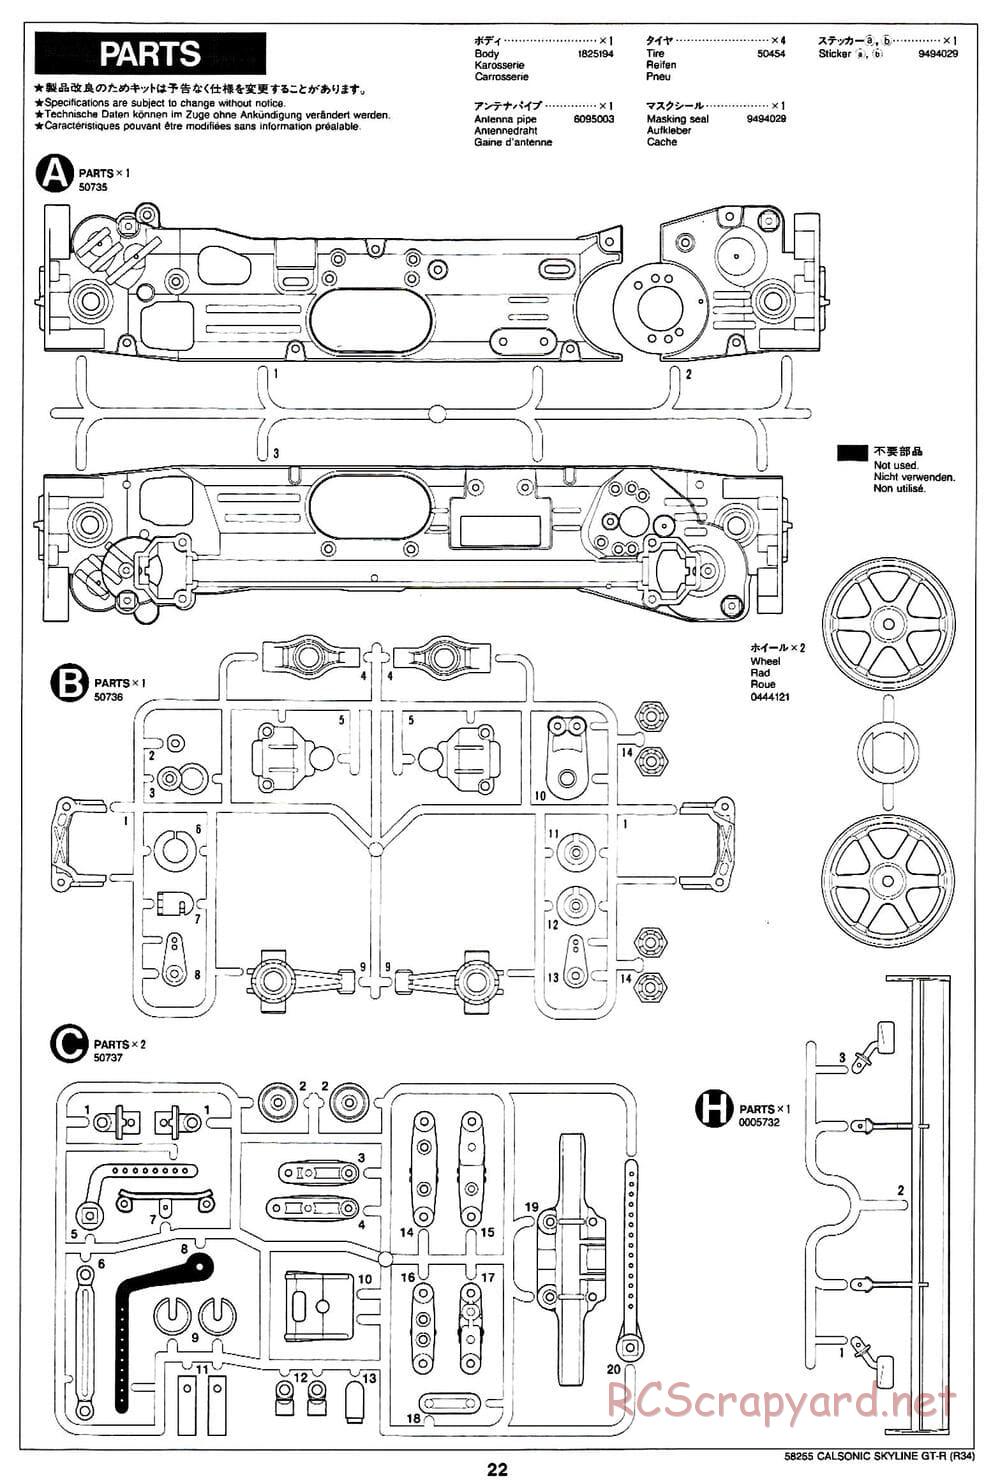 Tamiya - Calsonic Skyline GT-R (R34) - TL-01 Chassis - Manual - Page 22